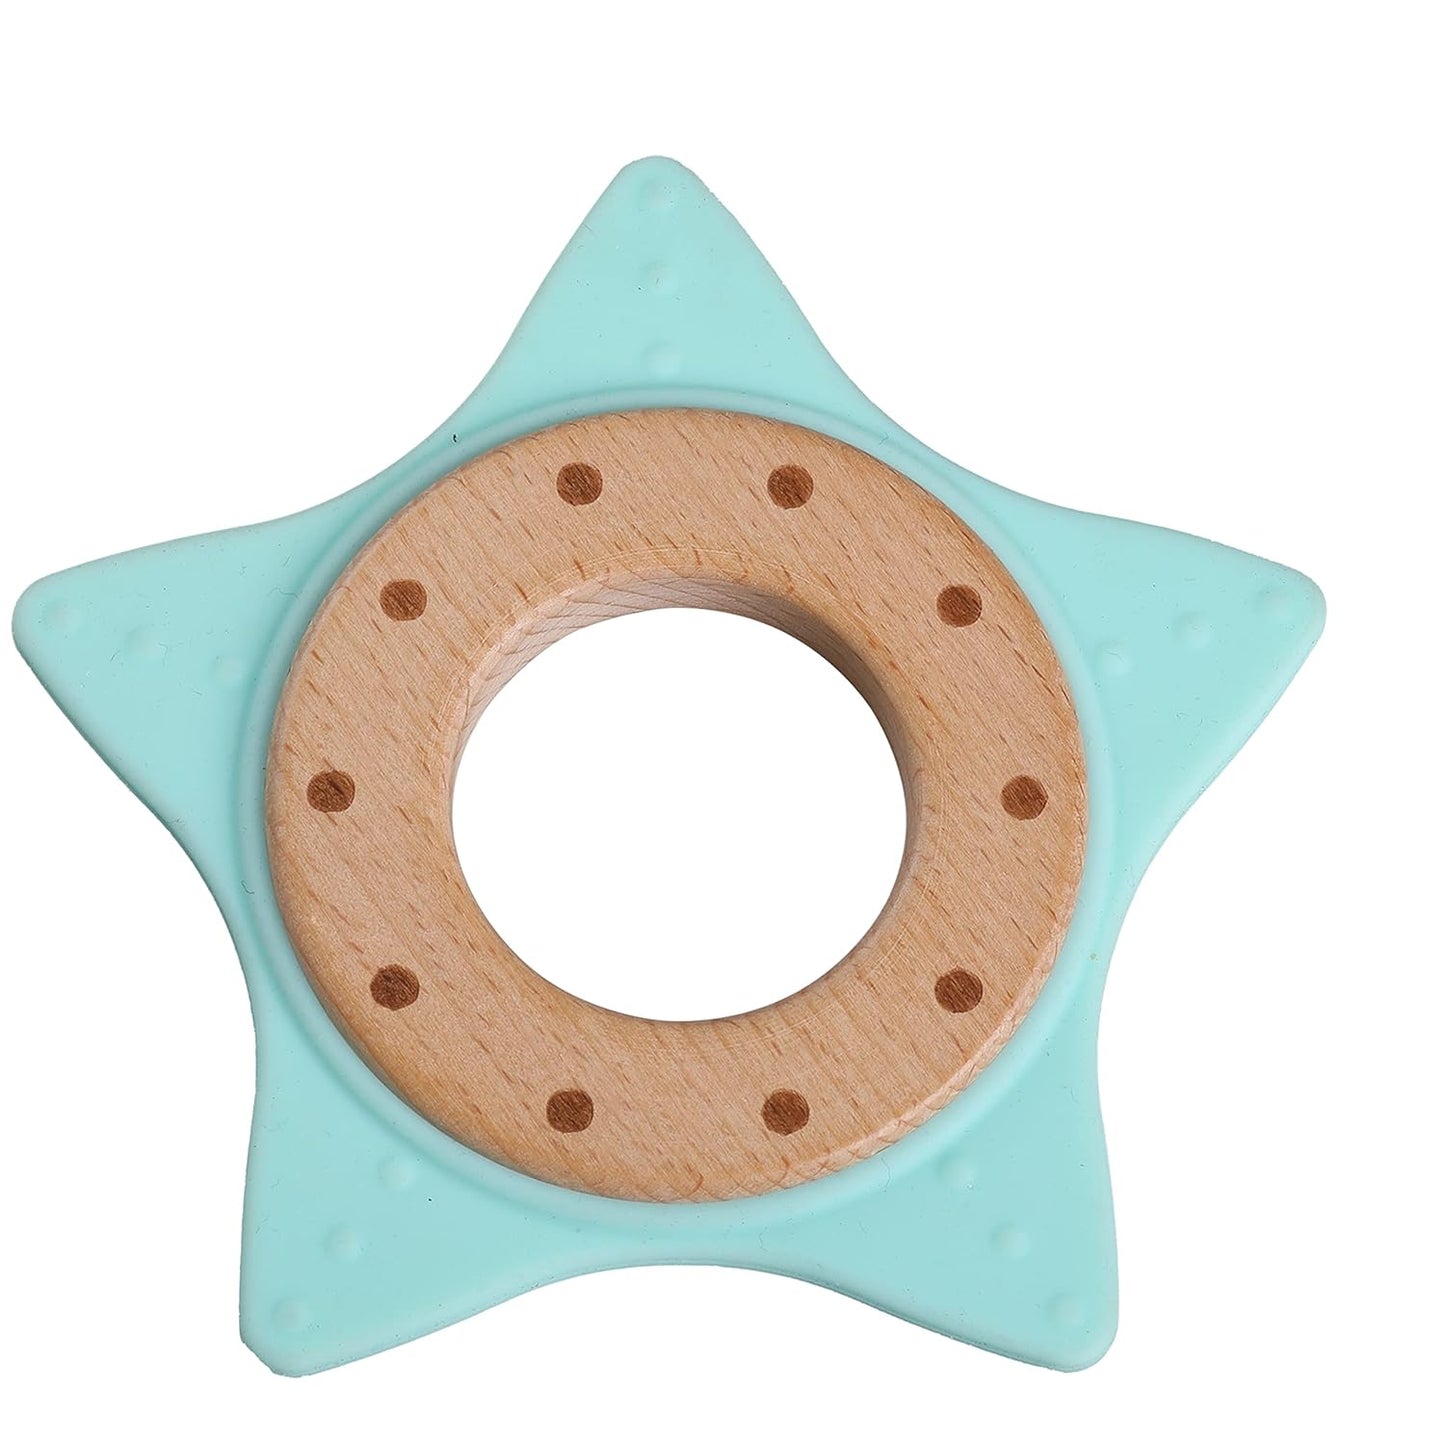 LuvLap Lightweight Baby Teether - Natural Beech Wood Inner Ring, 100% Food Grade Silicone, Easy to Hold, Suitable for 3+ Months (Light Green) -19211